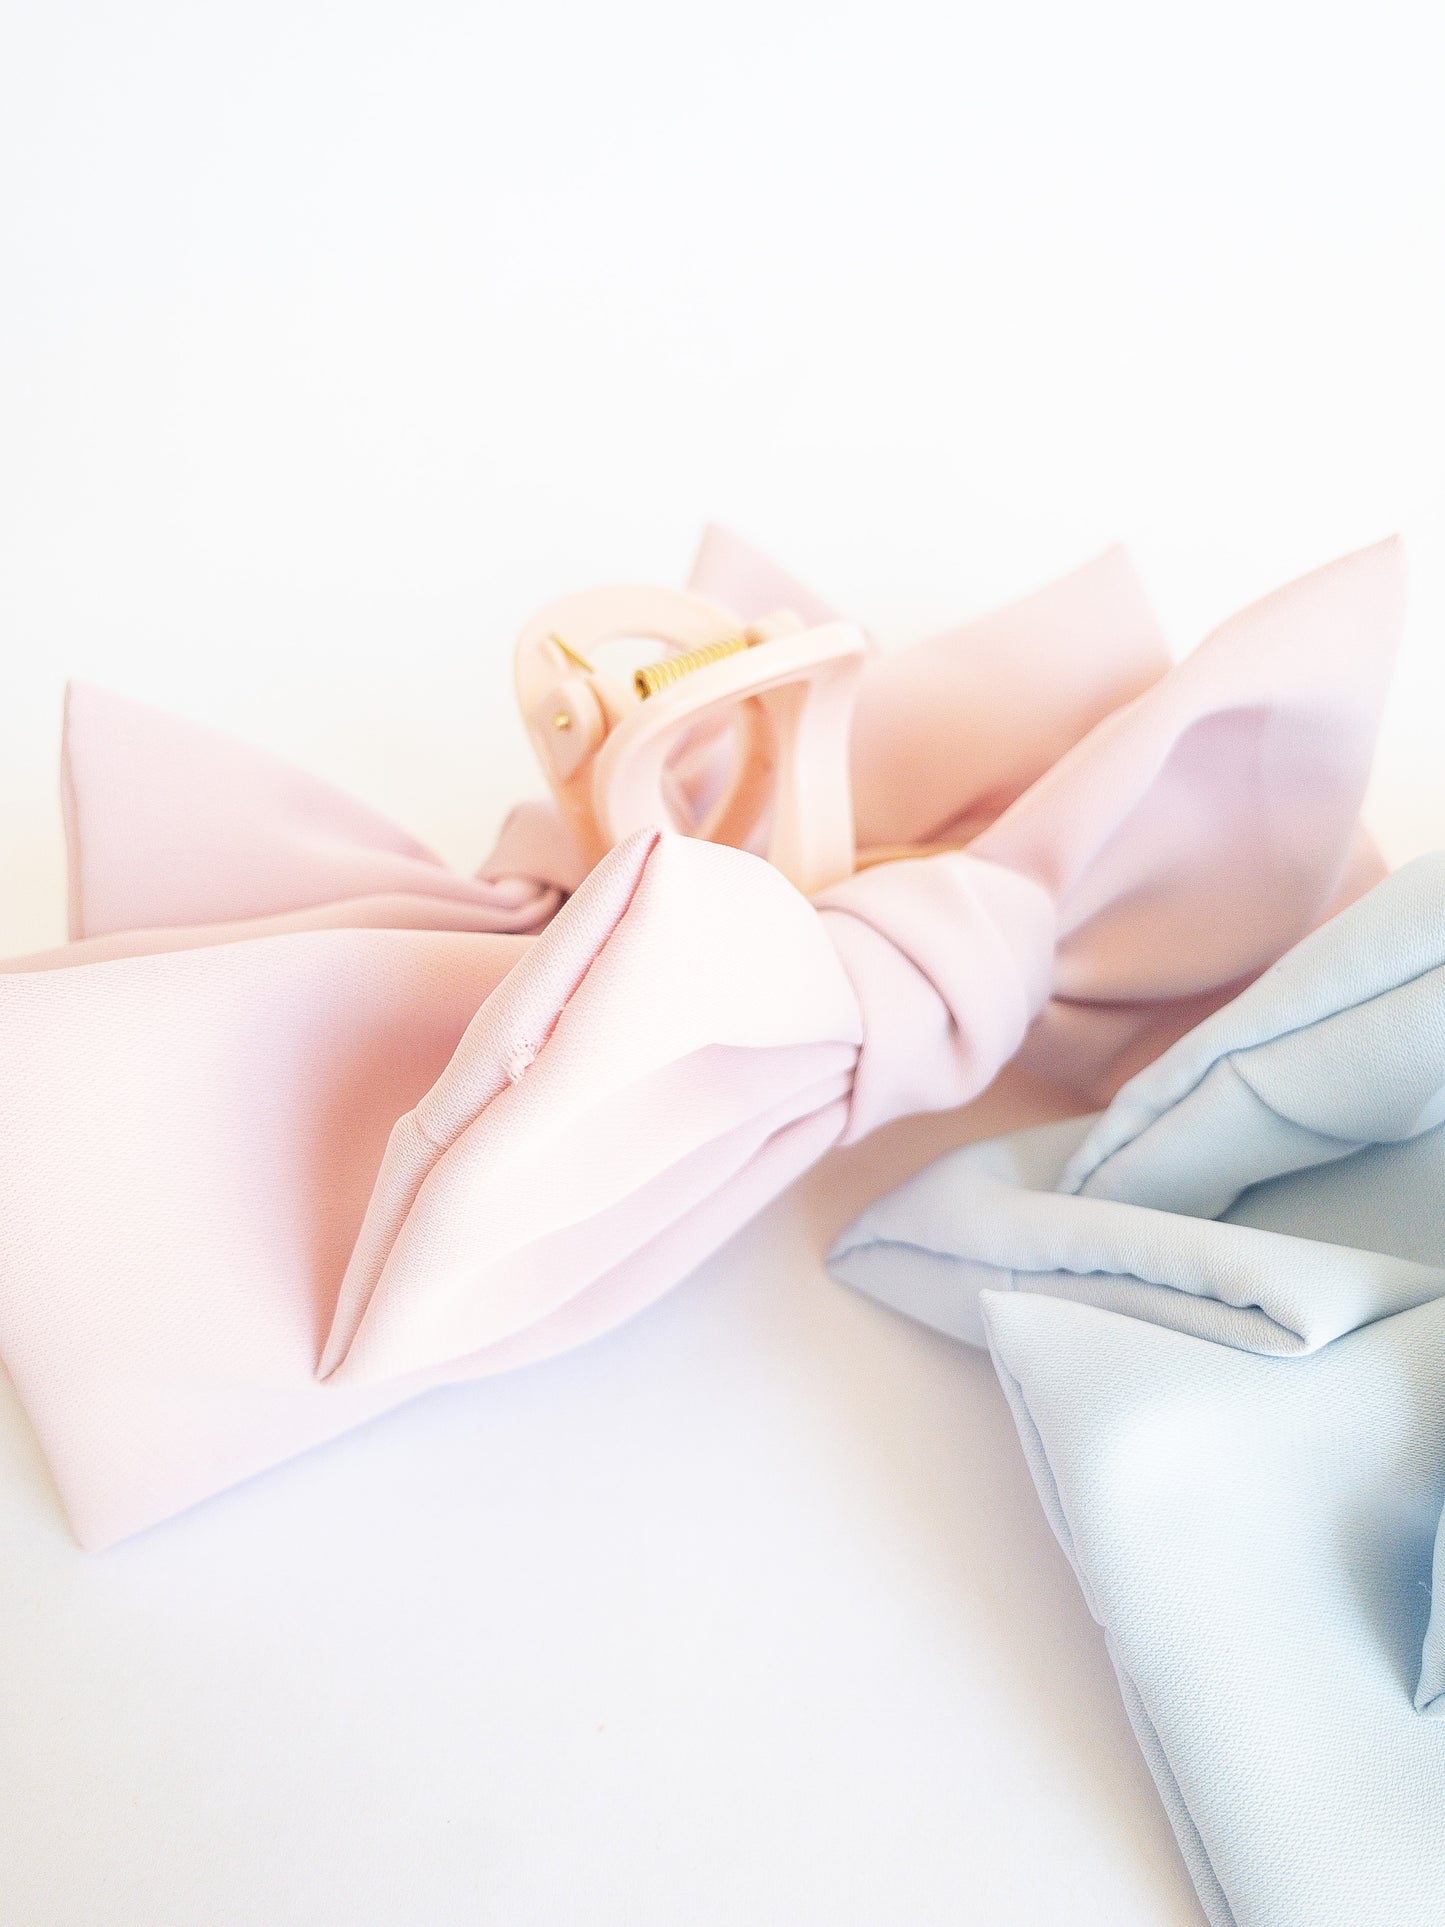 Put a bow on you, you're a gift!  This jumbo bow hair claw in a soft blush pink is for those girly days. When you want to frame your face with little wispy bangs and secure it with a pretty bow.